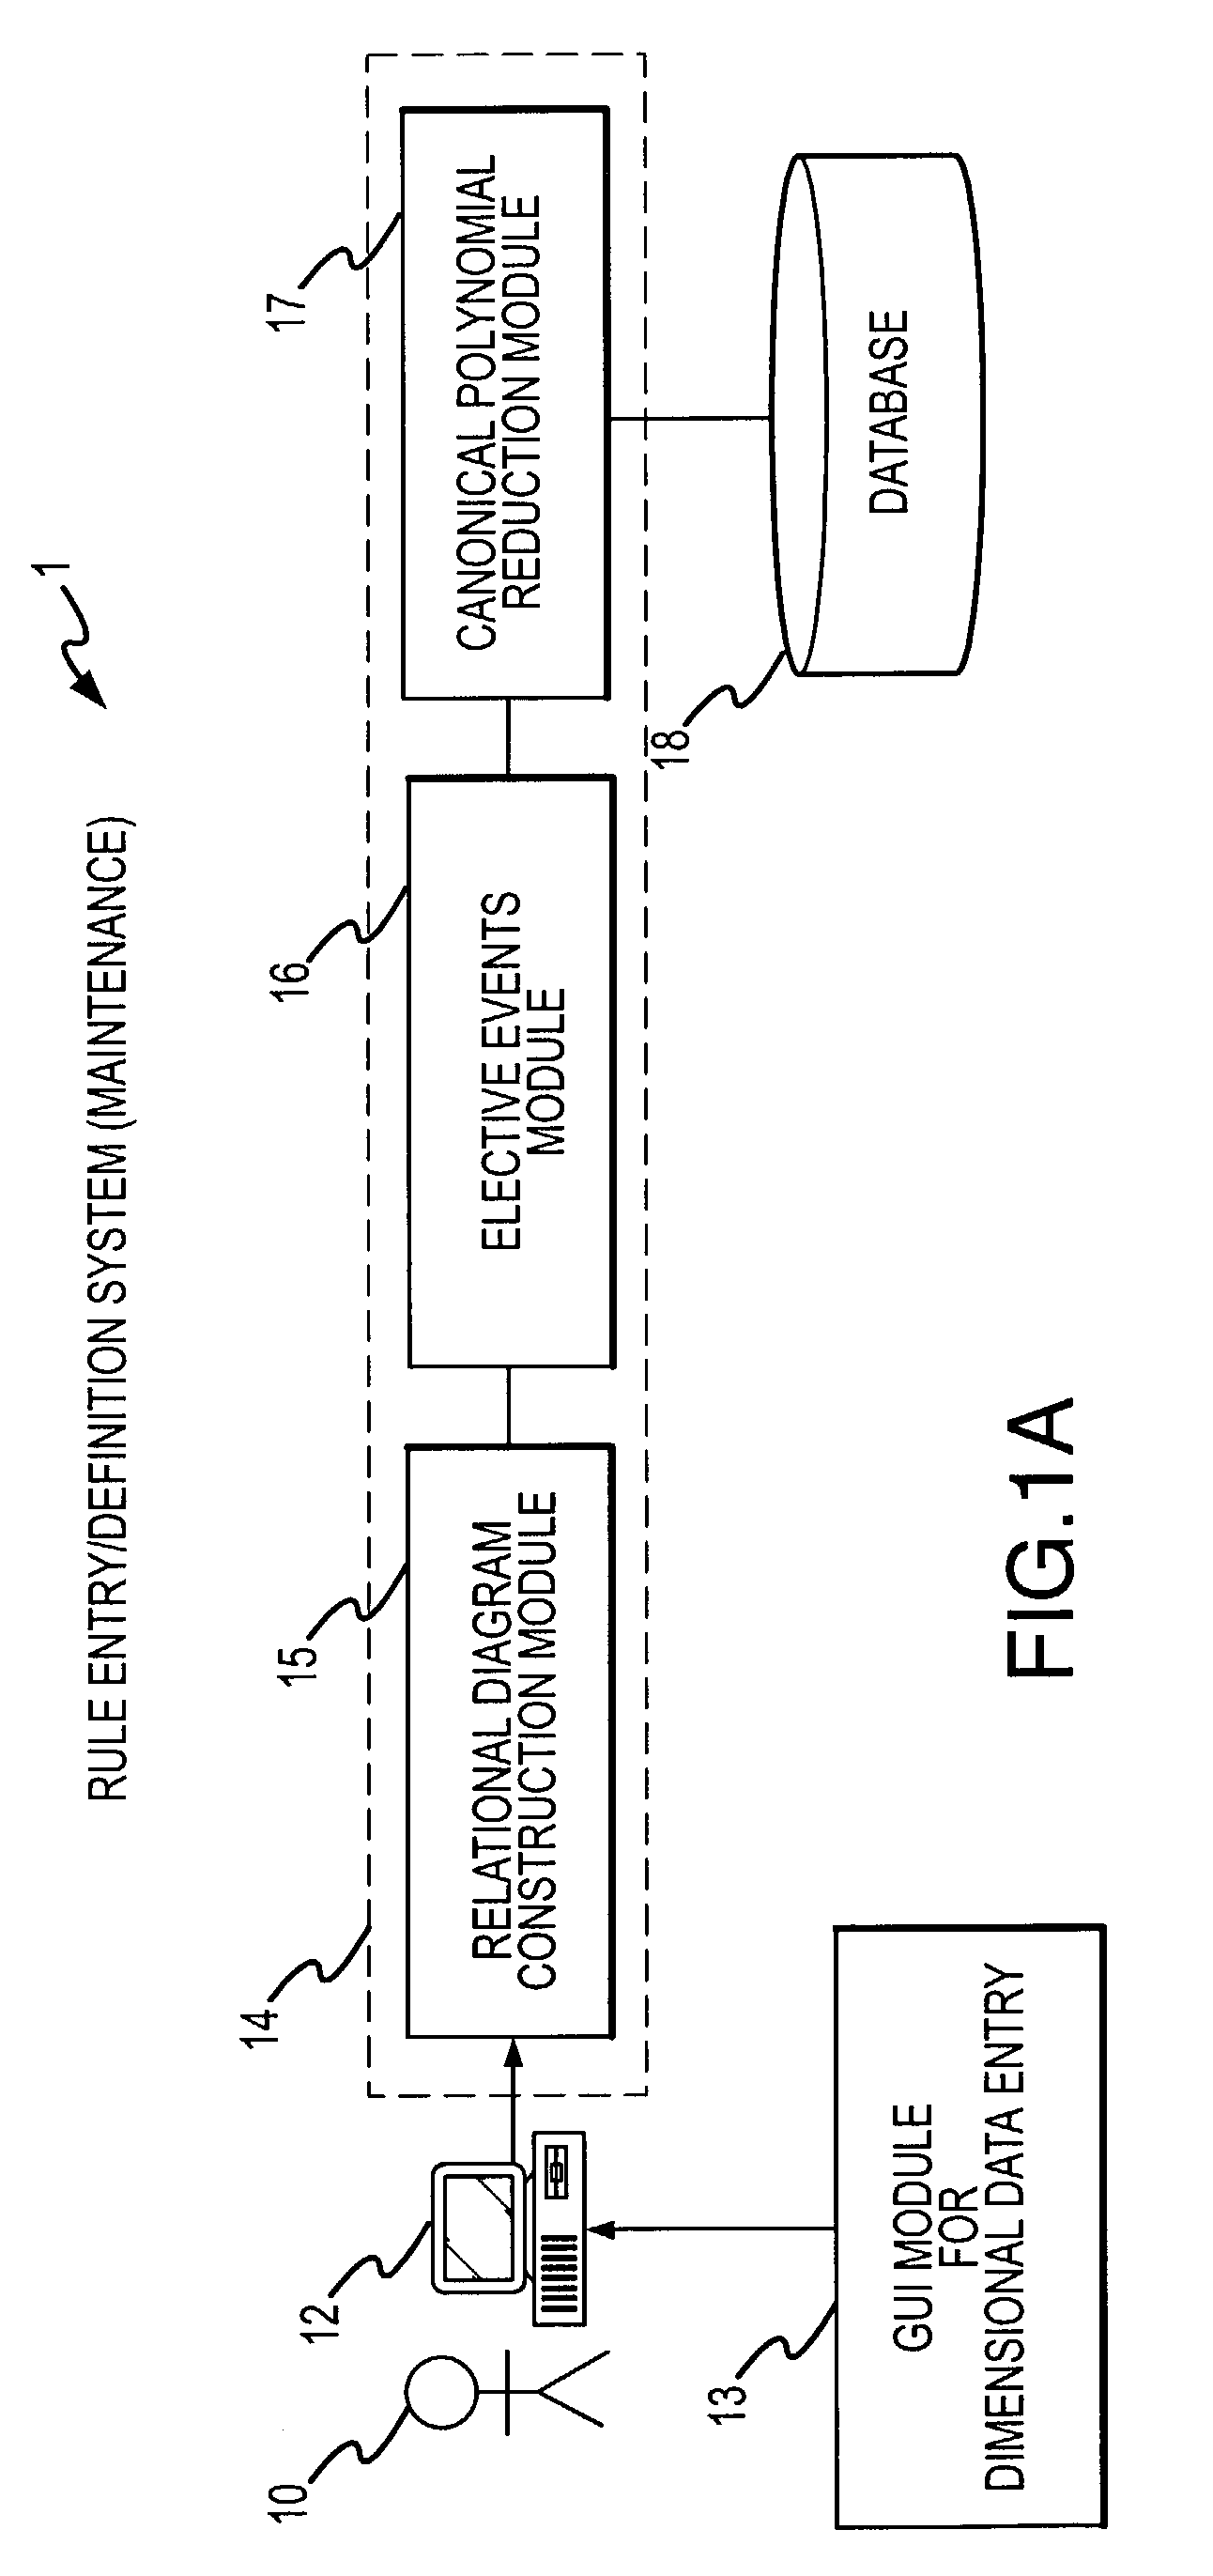 Method and system for capturing business rules for automated decision procession